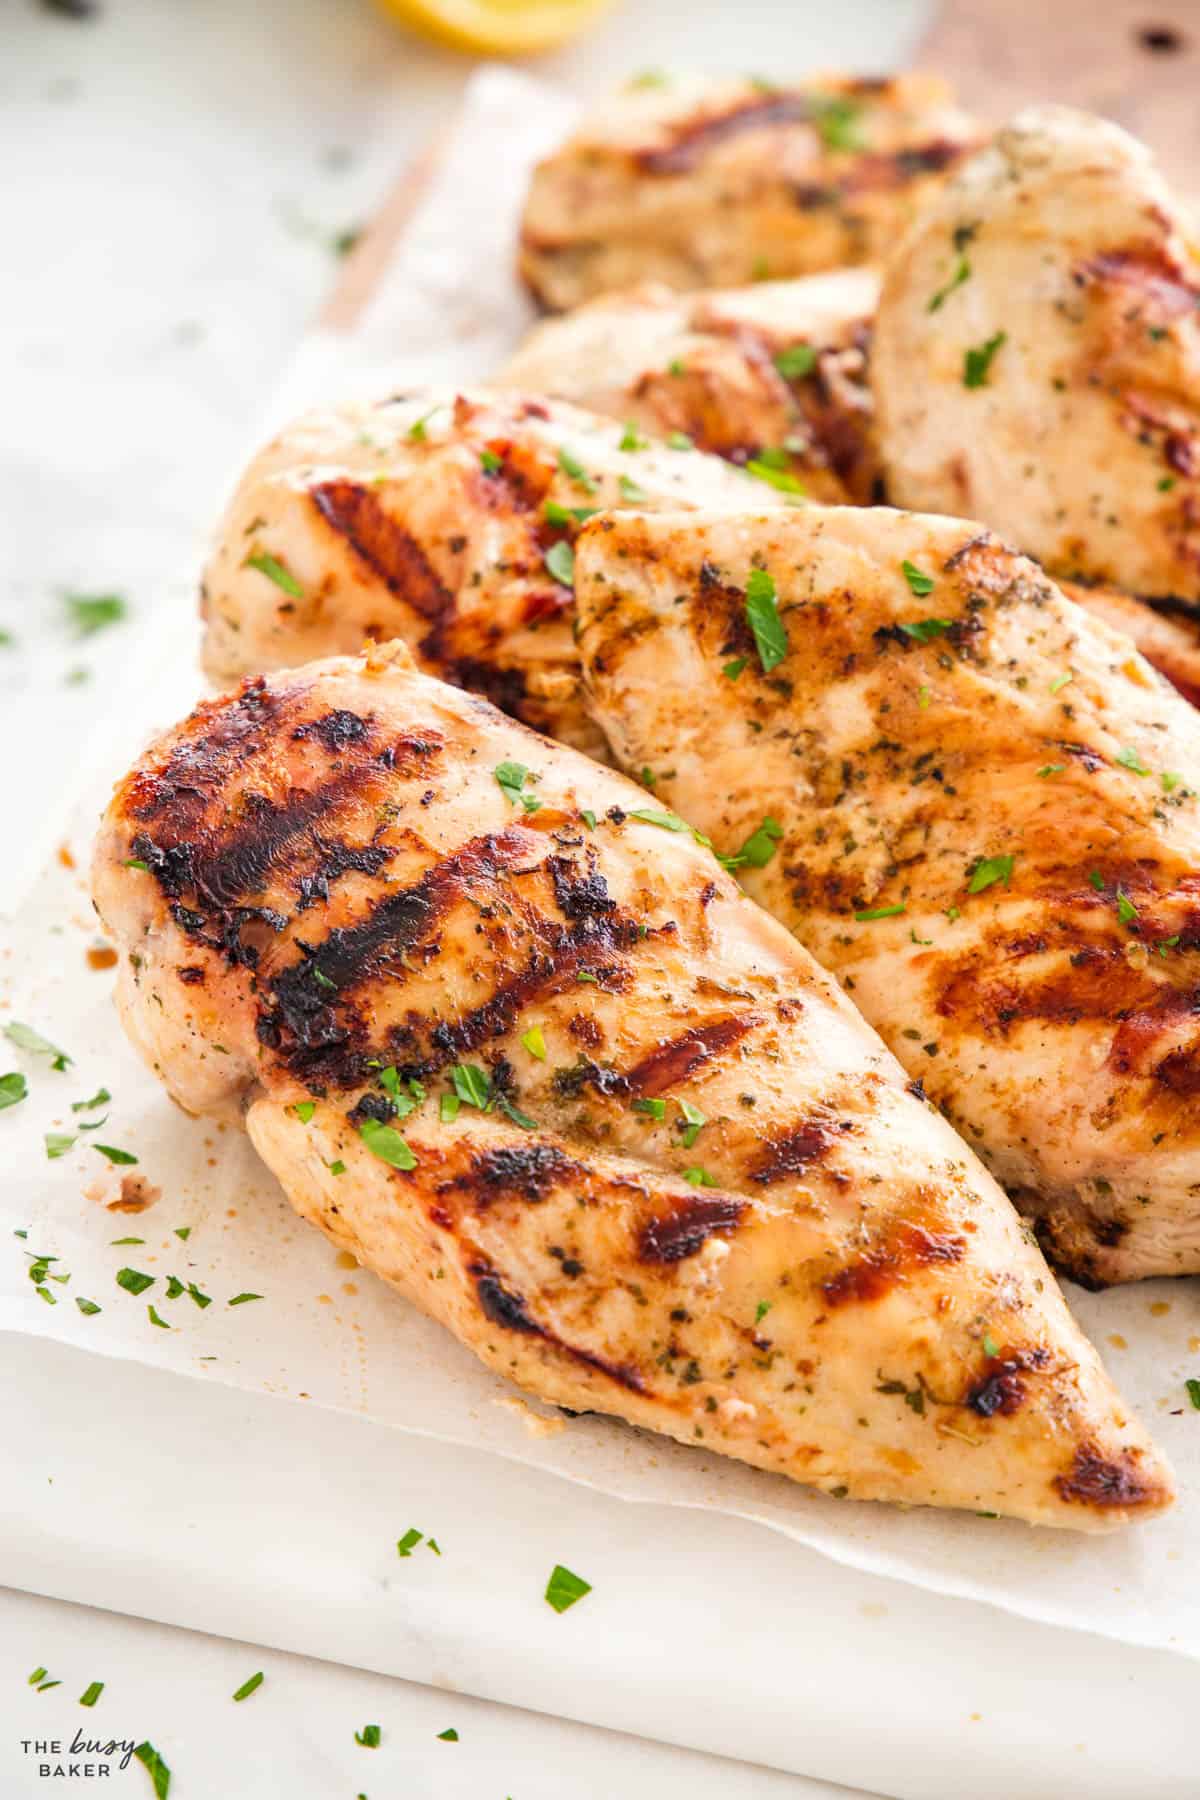 Chicken Breast with grill marks